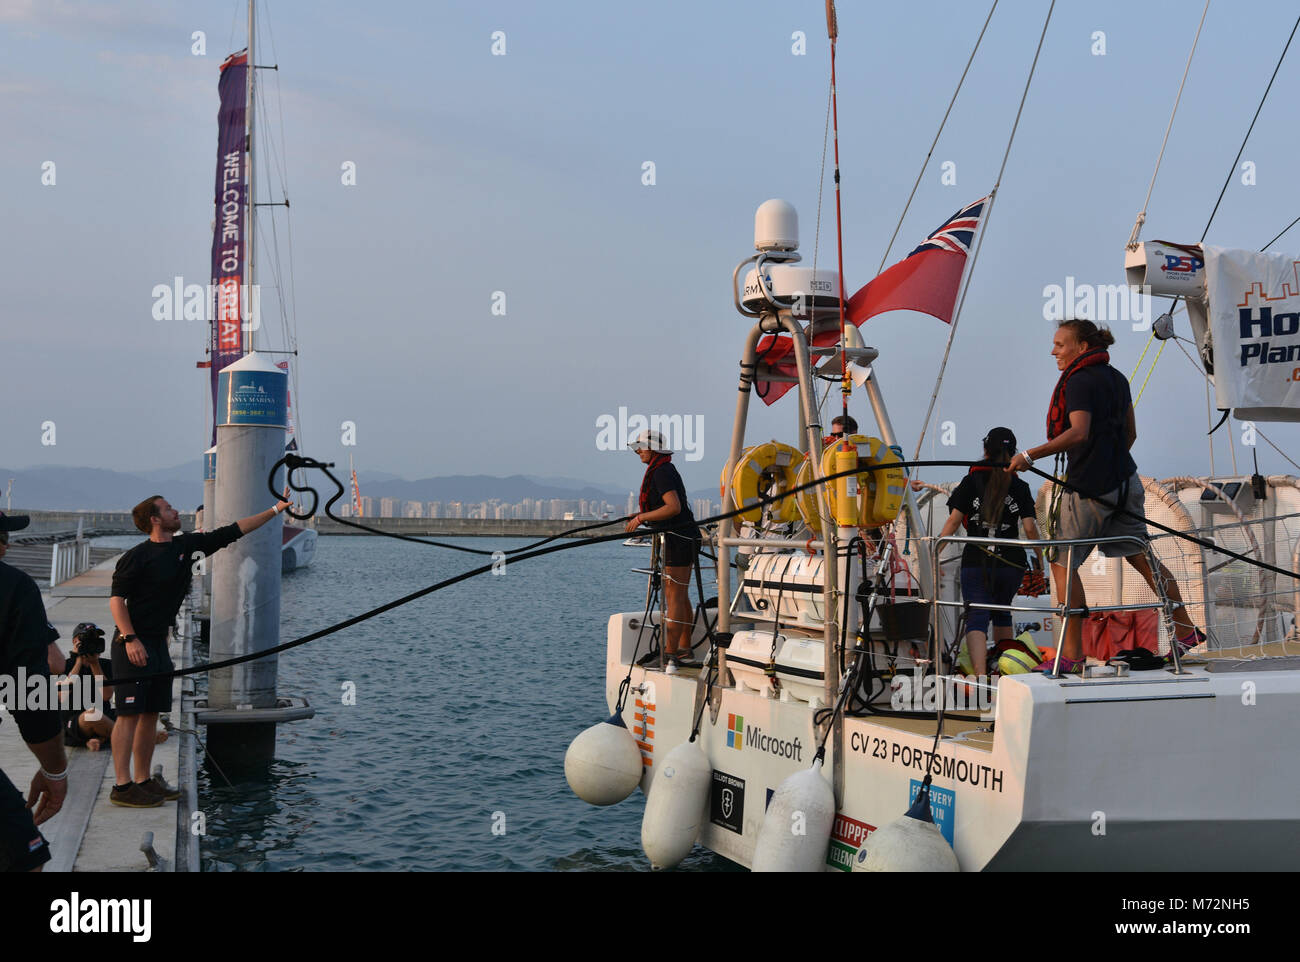 Clipper 70 yachts in the first in-port race at Sanya Gang, as part of the Clipper Round the World Yacht Race in Sanya, China on February 28, 2018. Stock Photo